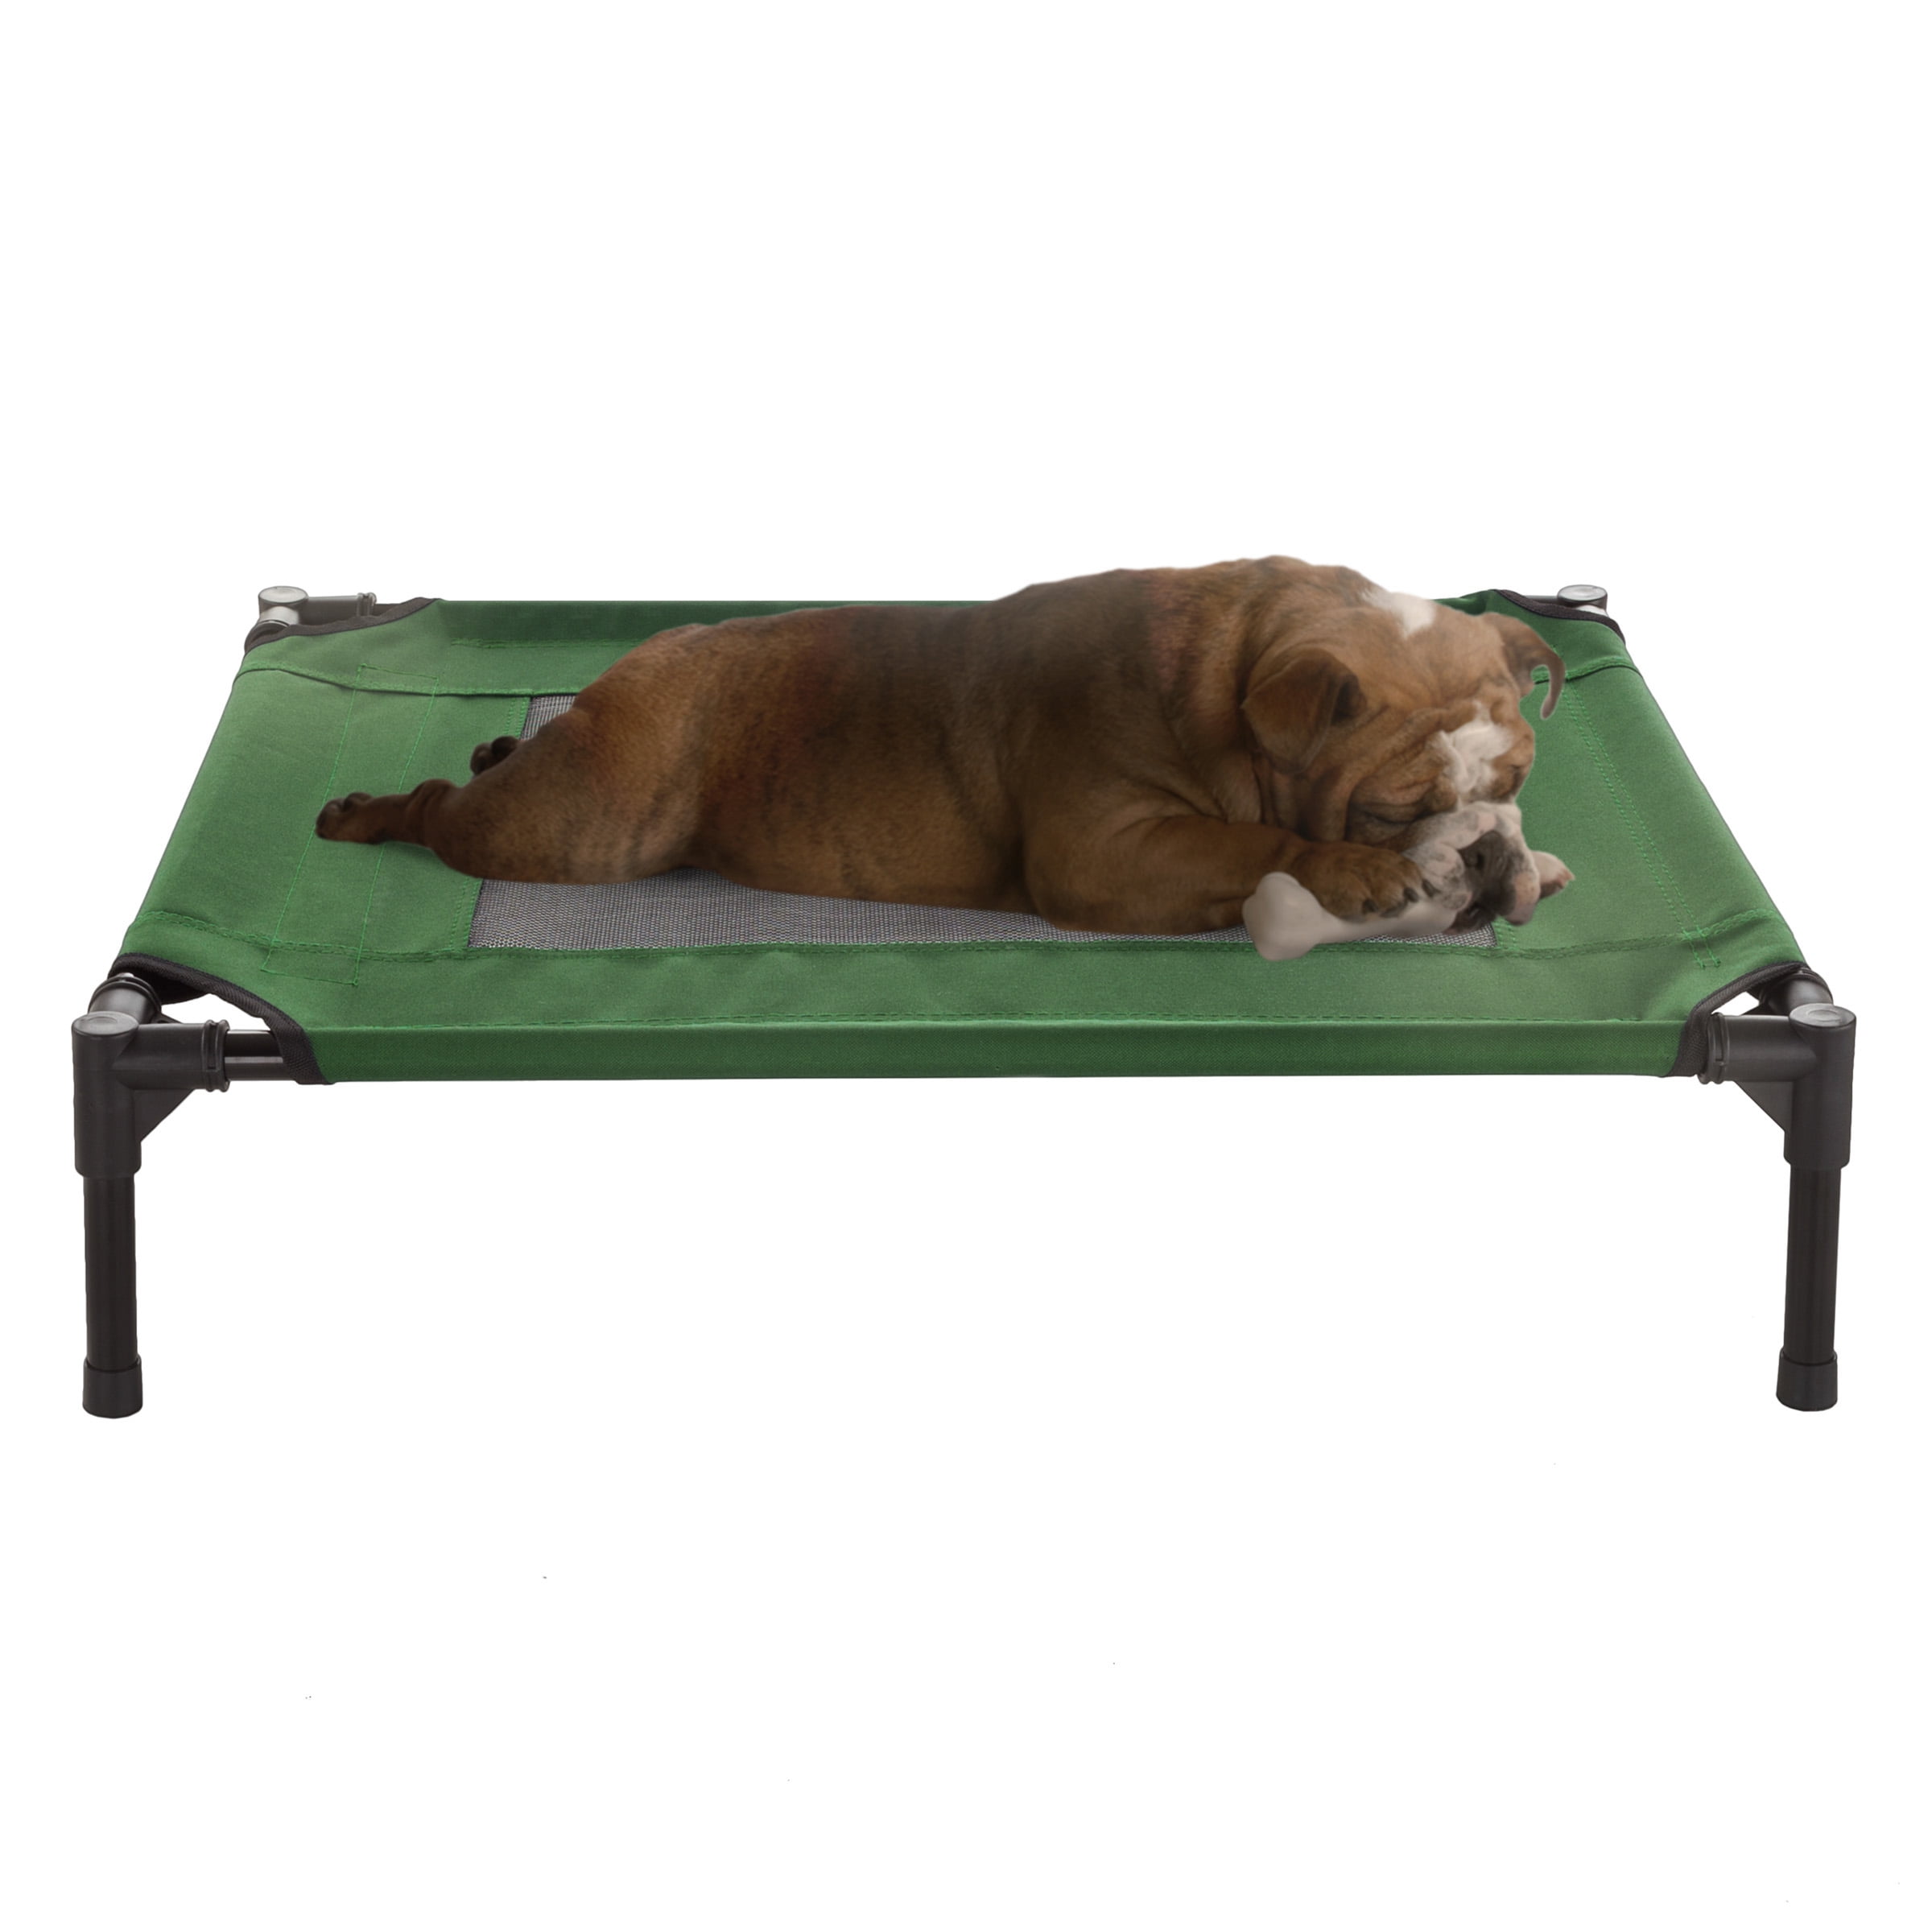 30x24 Portable elevated Bed for Pets with Non-Slip feet -Pets up